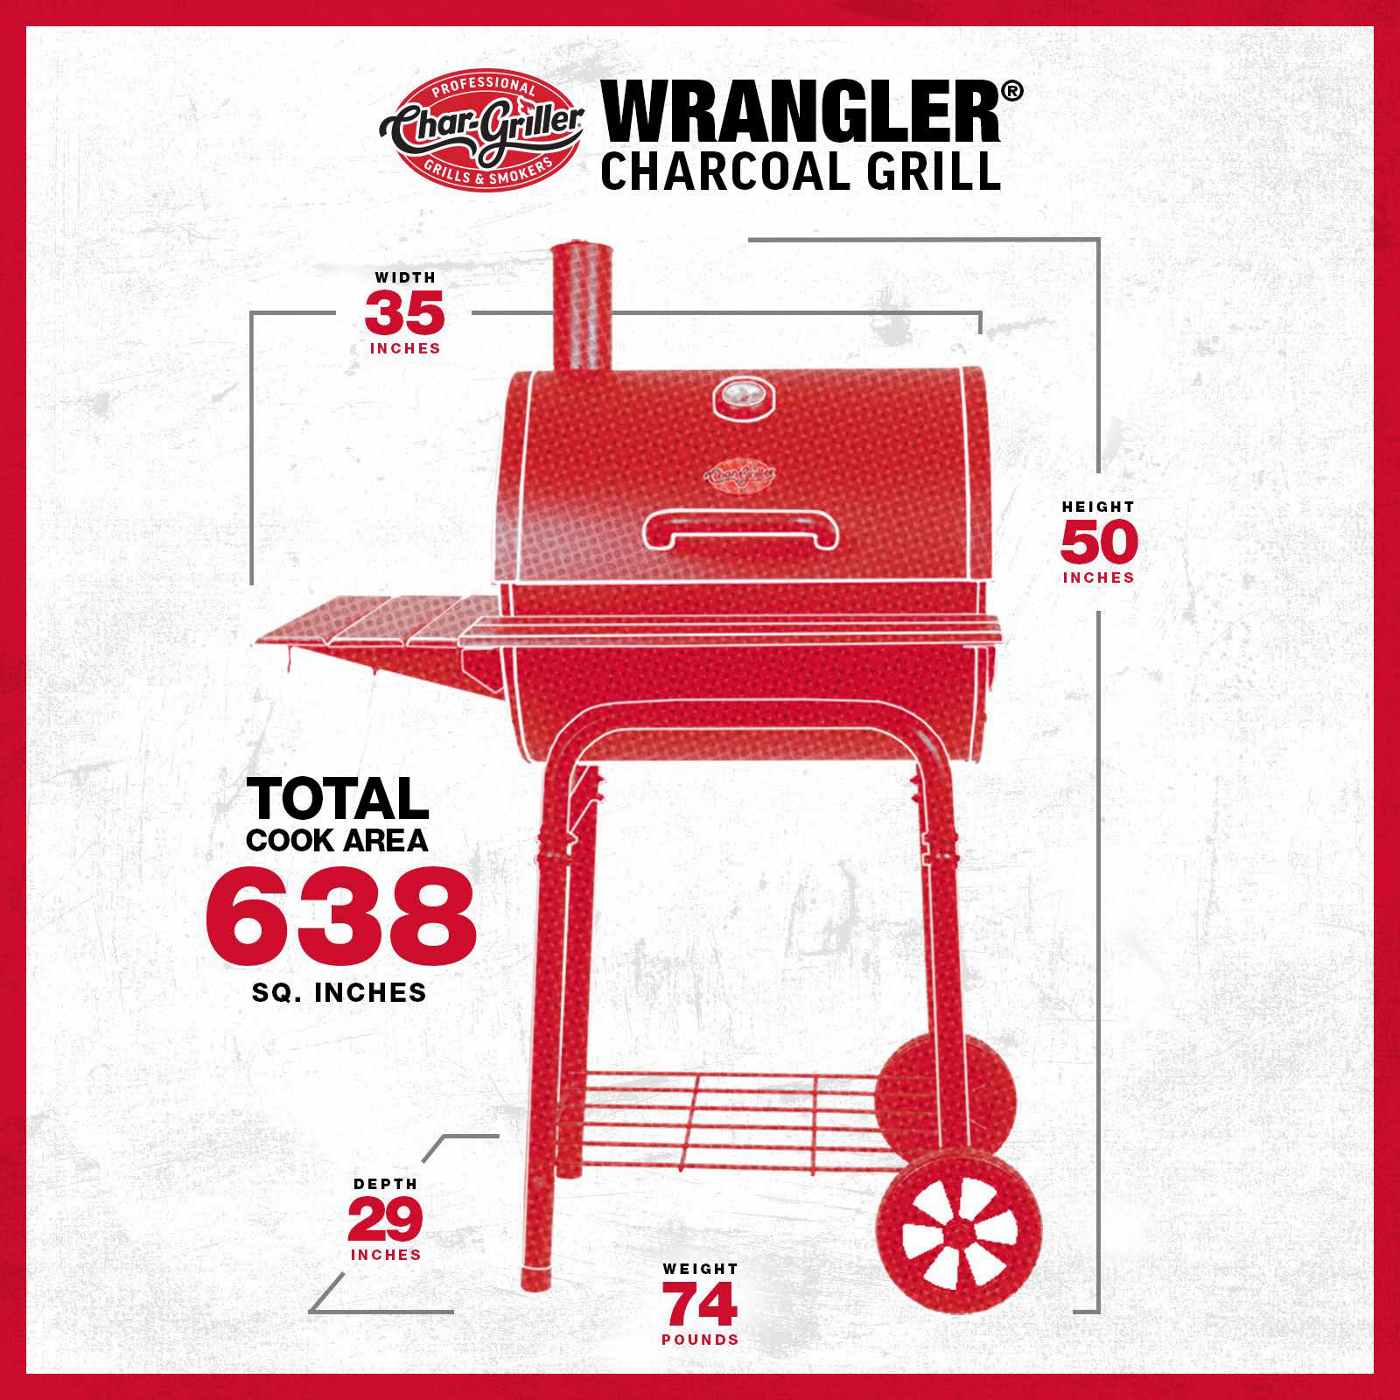 smal chap sekvens Char-Griller Wrangler Charcoal Grill - Shop Grills & Smokers at H-E-B